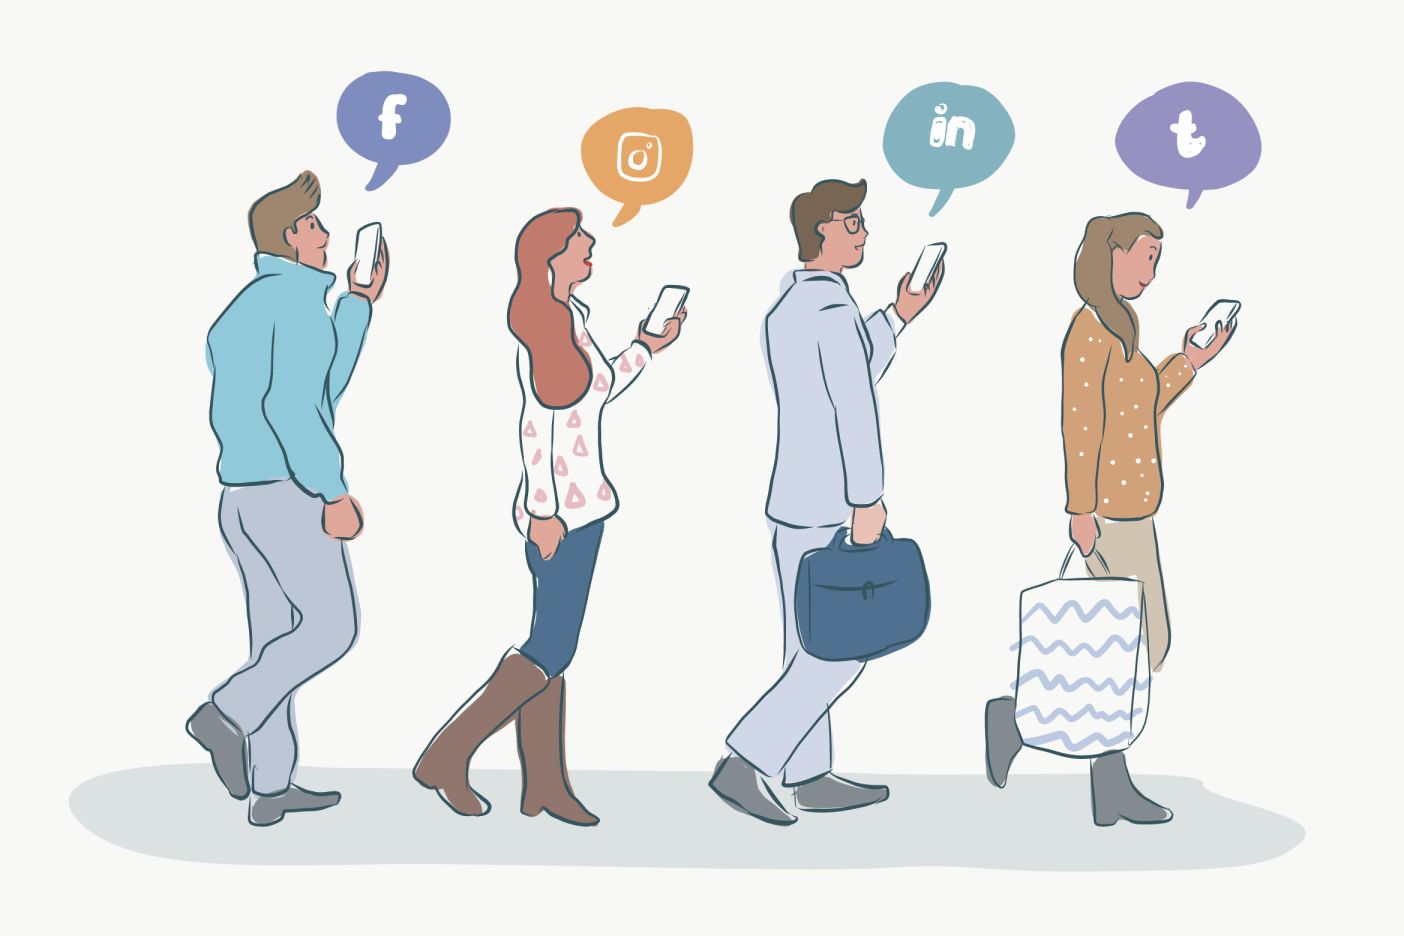 People walking with smartphone connected to different social media platforms